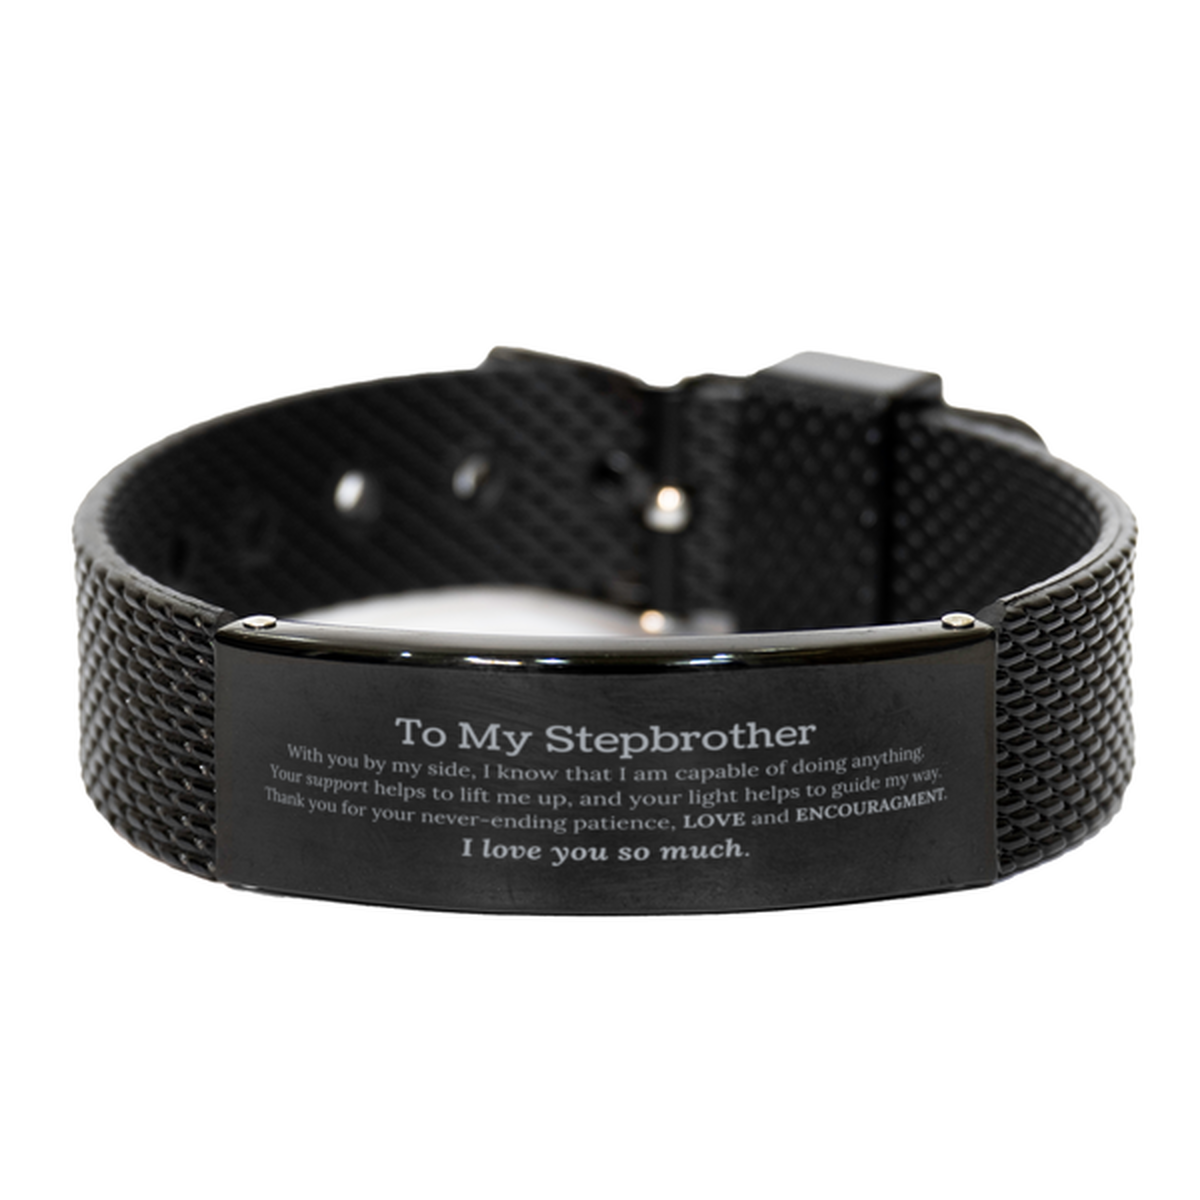 Appreciation Stepbrother Black Shark Mesh Bracelet Gifts, To My Stepbrother Birthday Christmas Wedding Keepsake Gifts for Stepbrother With you by my side, I know that I am capable of doing anything. I love you so much